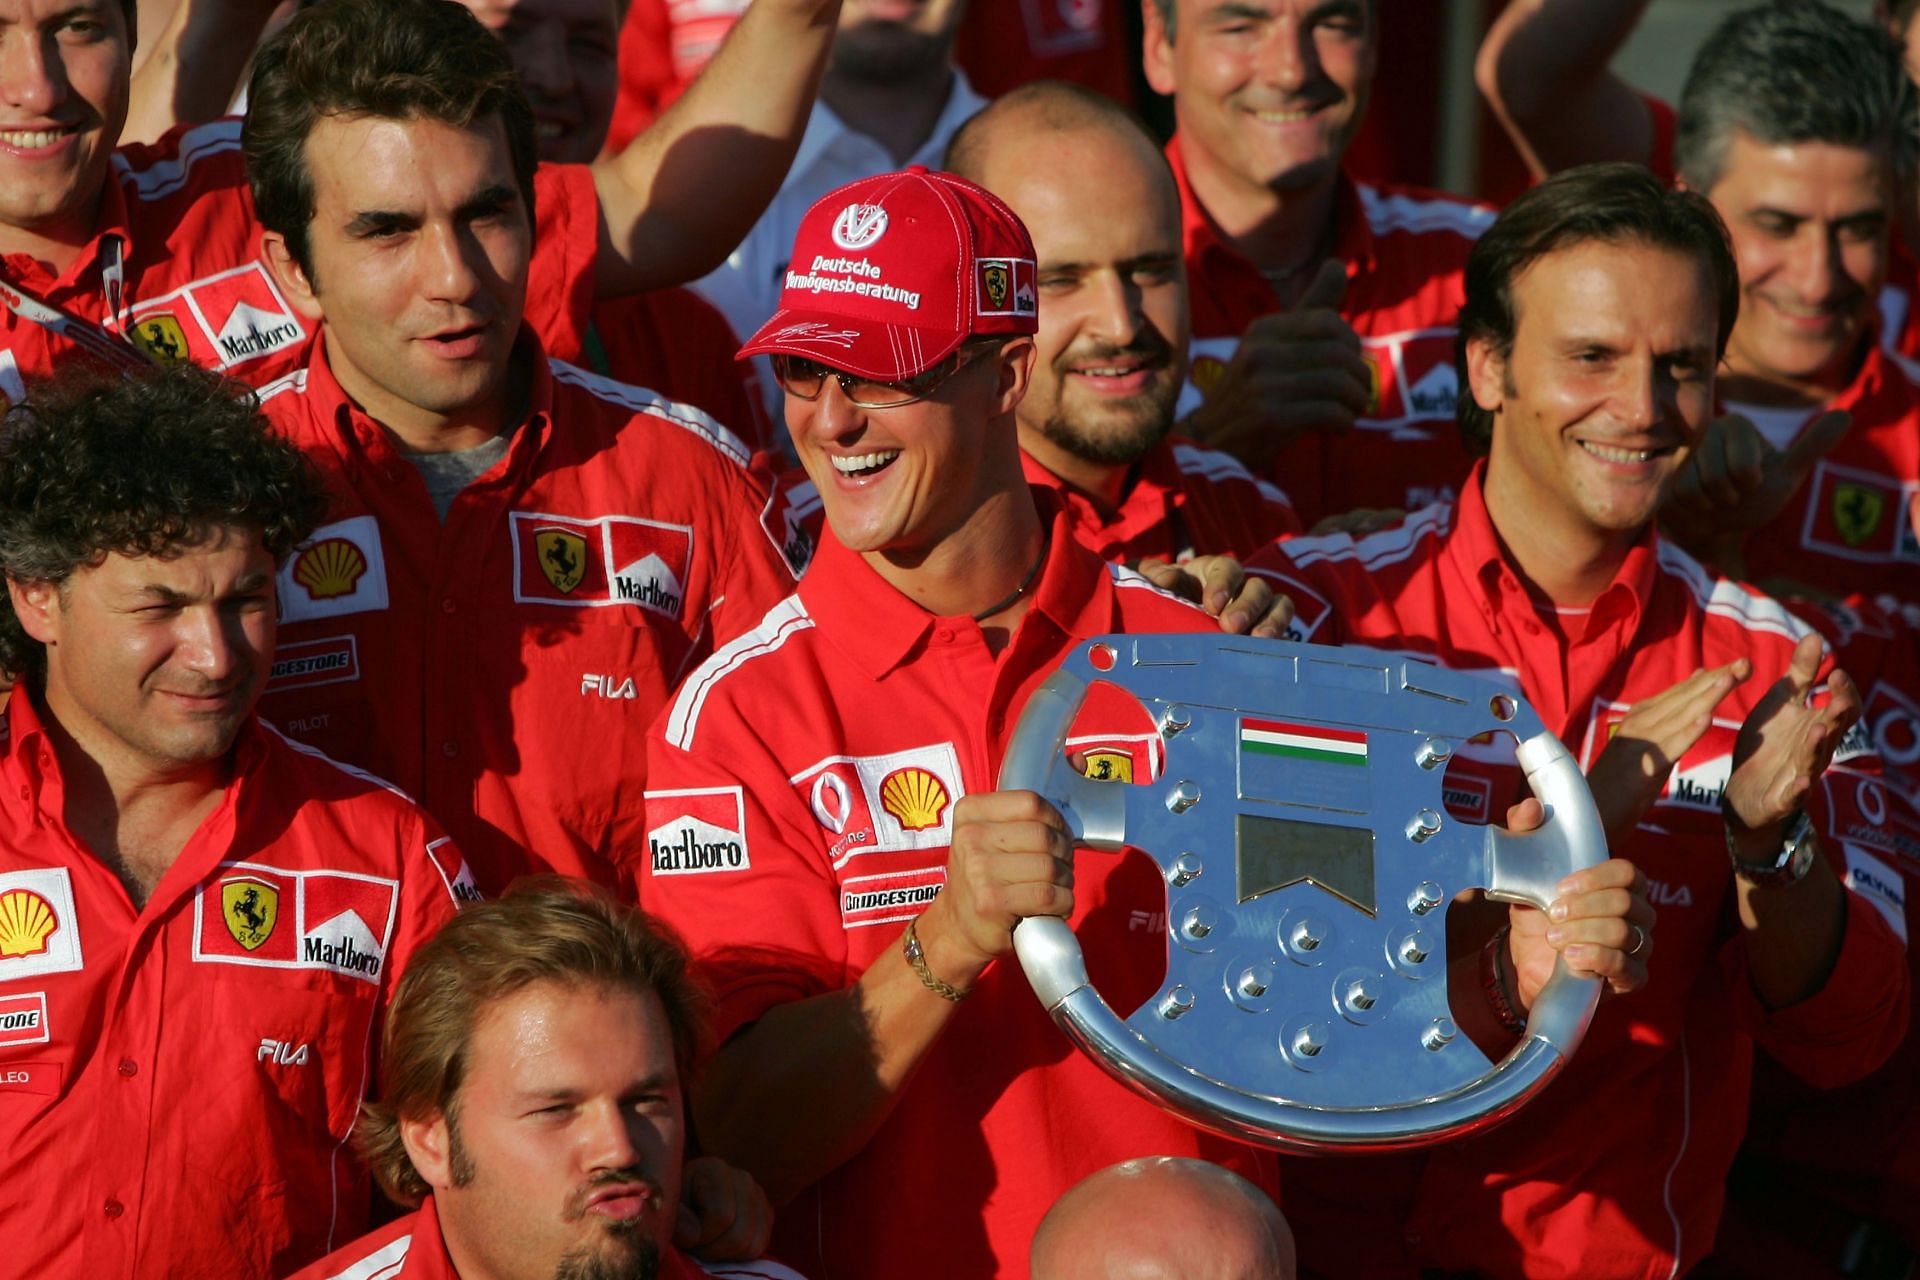 Michael Schumacher celebrates his 2004 victory at the Hungarian Grand Prix Photo by Clive Rose/Getty Images)